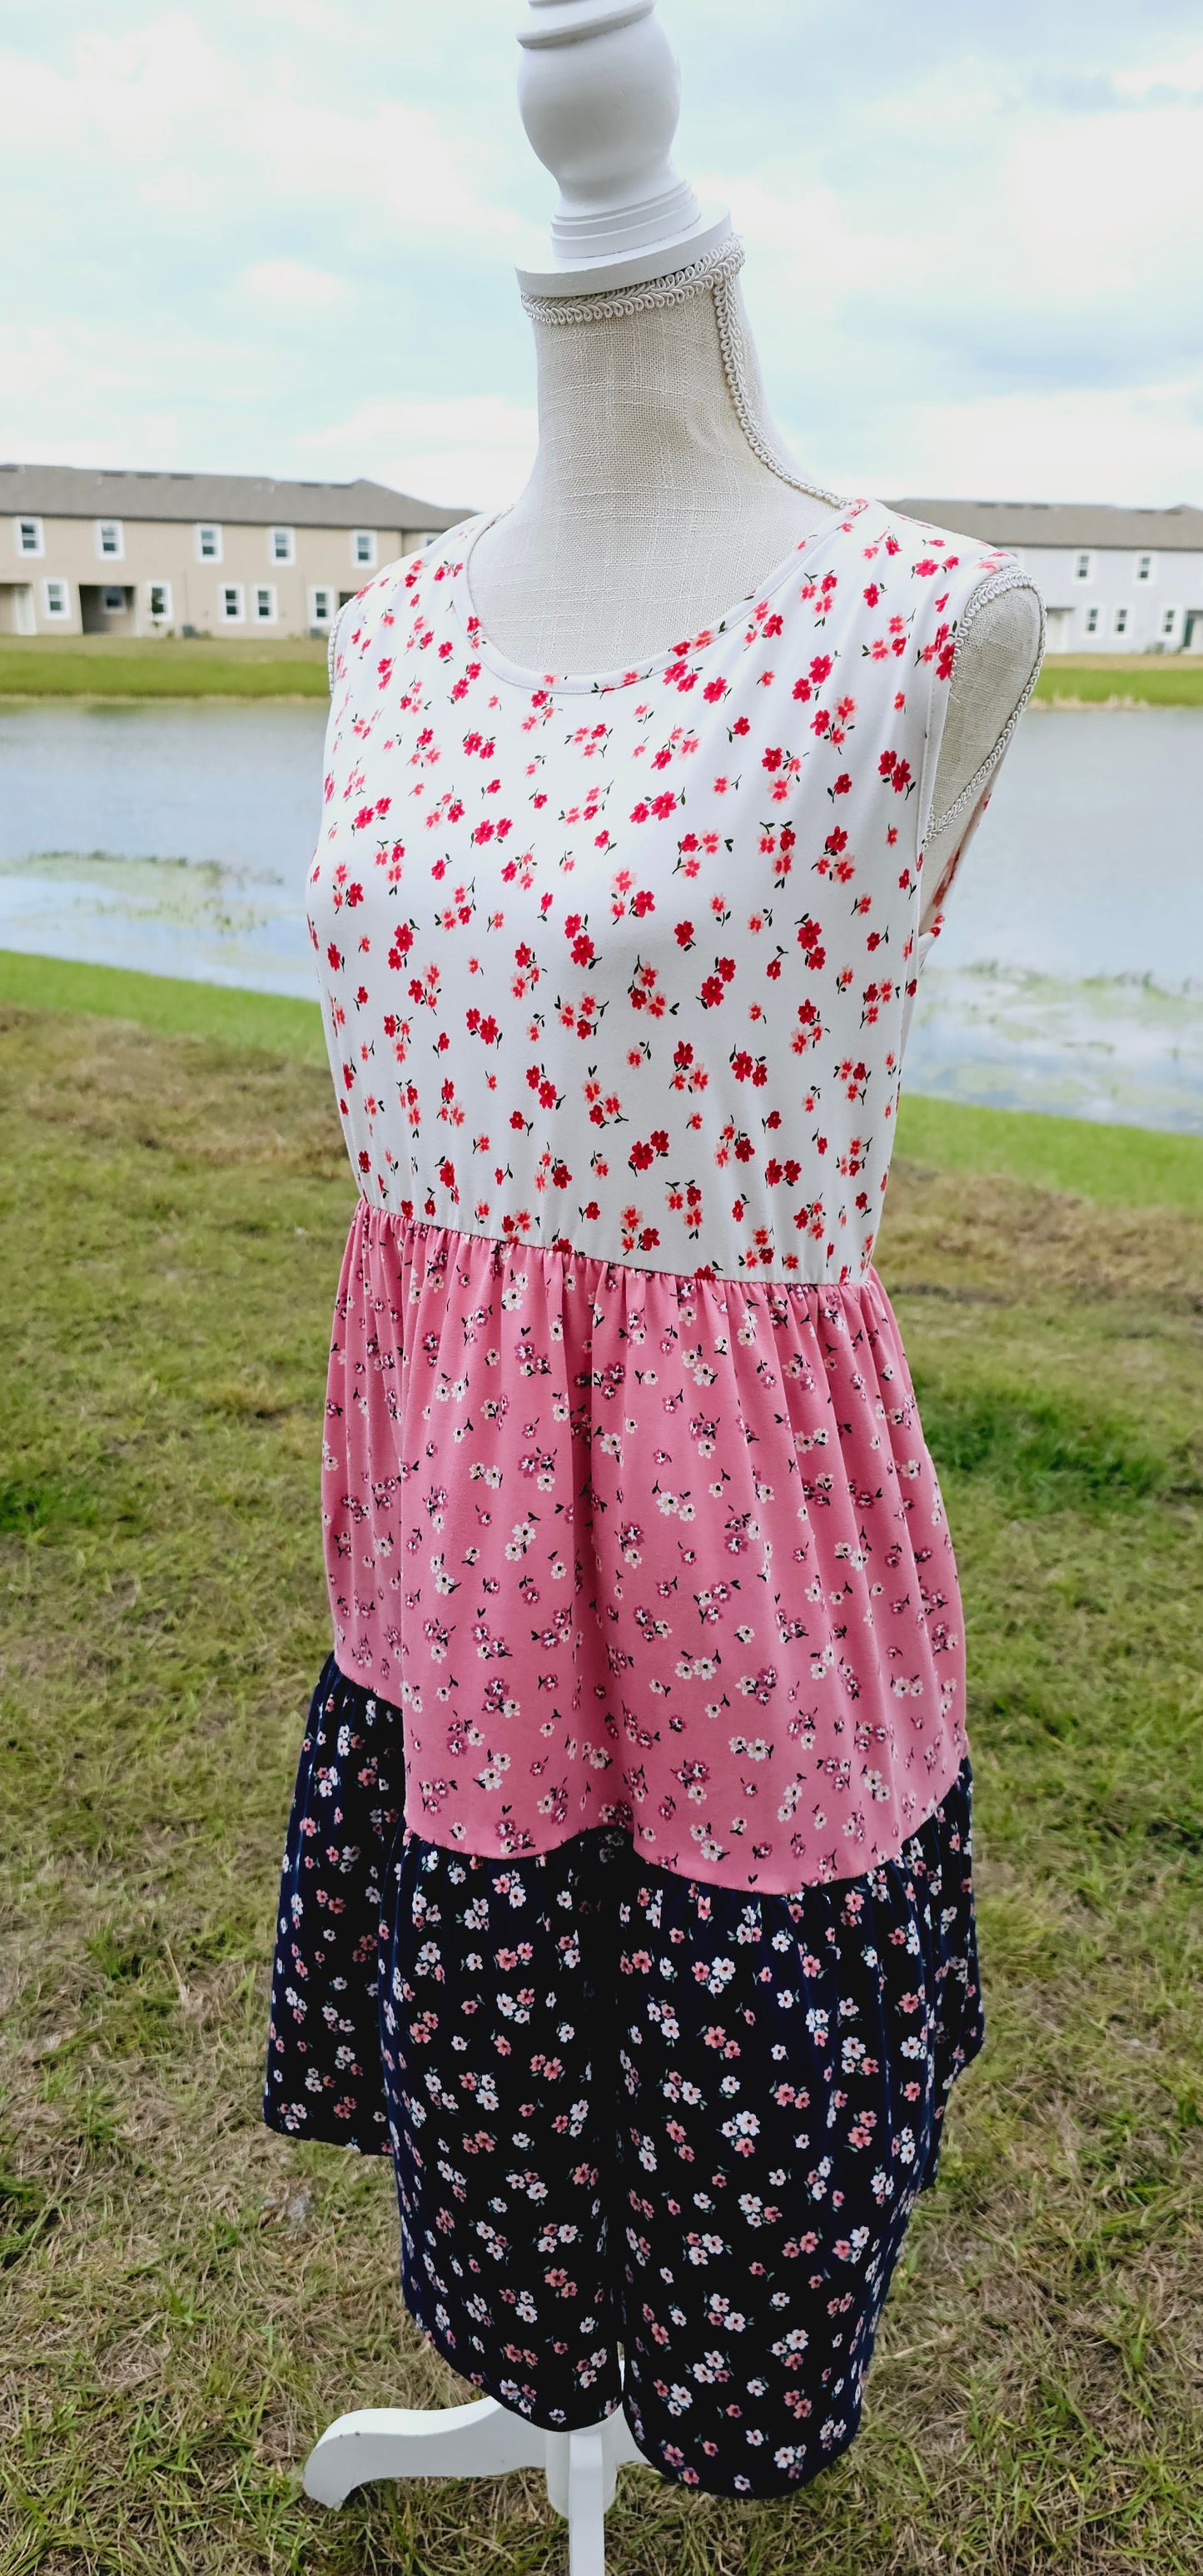 The “Flower Child“ dress is sleeveless, it features a rounded neckline, tiered layers, two functional pockets, and it sits above the knees. It is a buttery soft material. This is unlined, non-sheer, and lightweight. This dress is off white, dusty mauve, and navy blue with red, pink, and dusty mauve flowers. Sizes small through x-large.